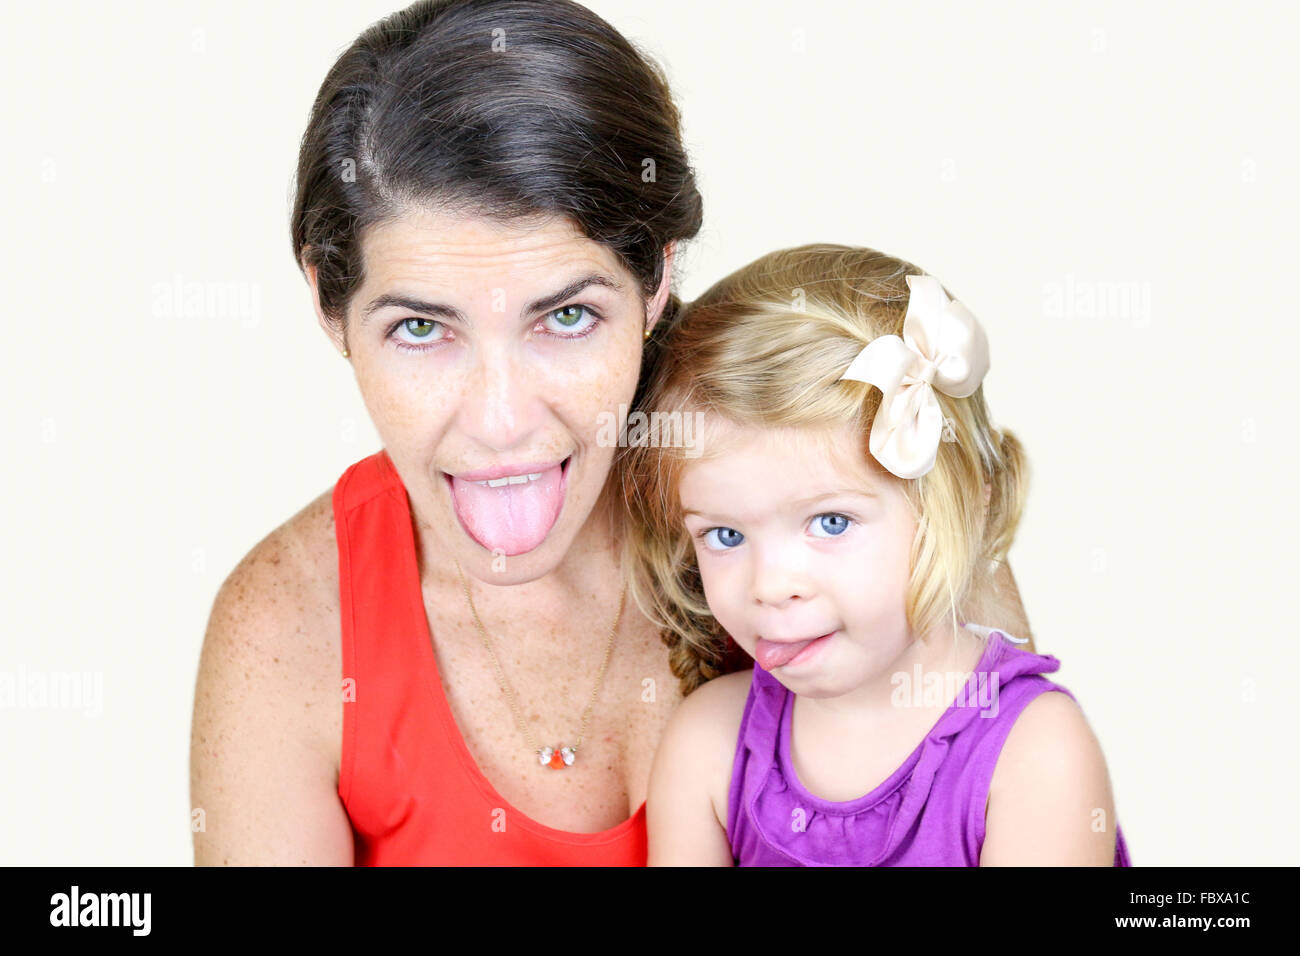 Mother And Daughter Making Silly Faces Stock Photo